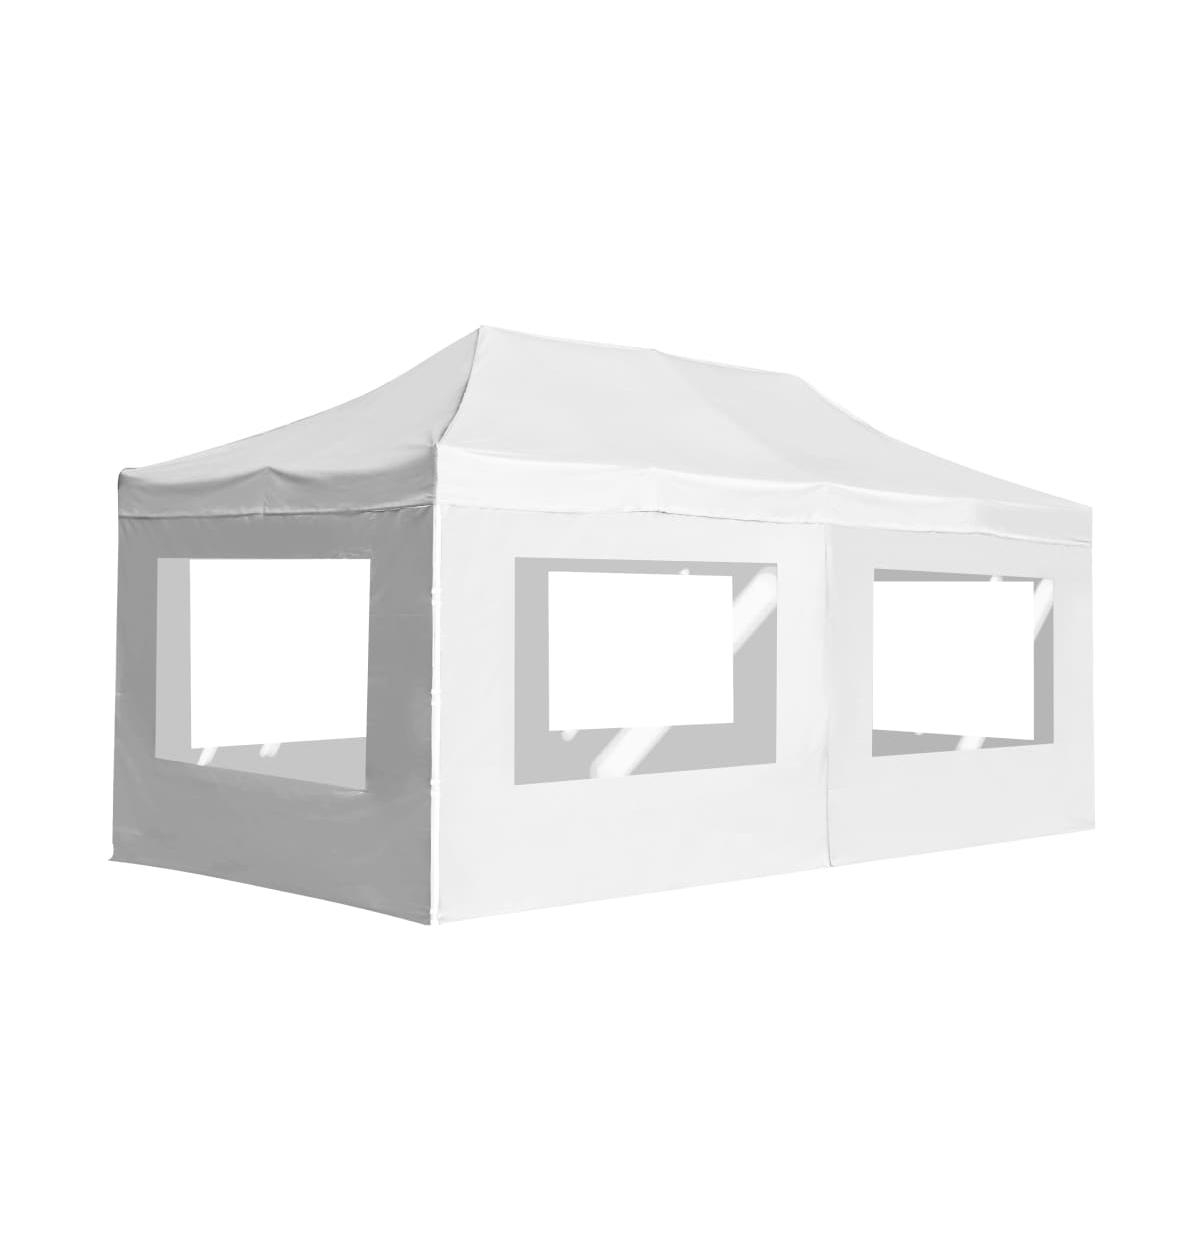 Professional Folding Party Tent with Walls Aluminum 19.7'x9.8' White - White